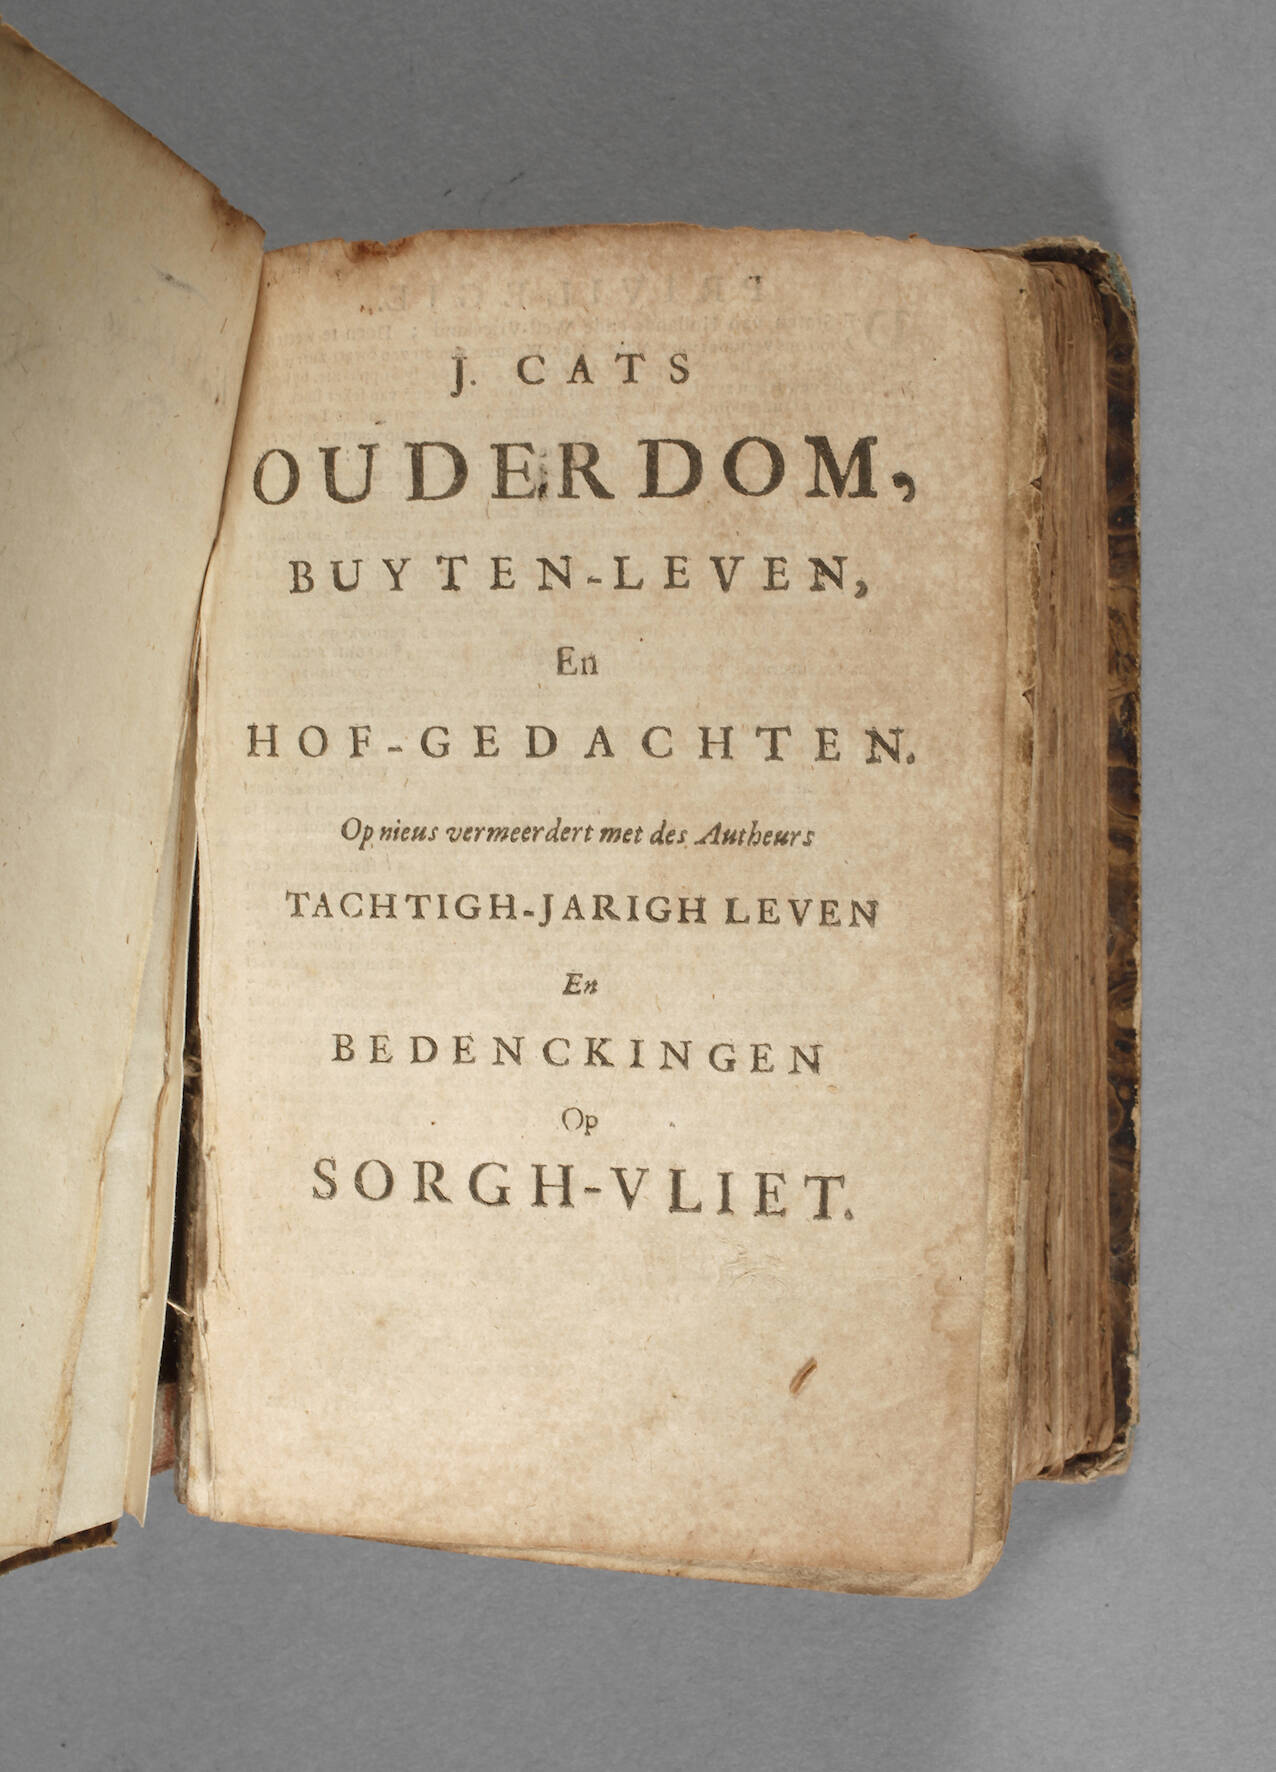 Jacob Cats (1577–1660) Ouderdom